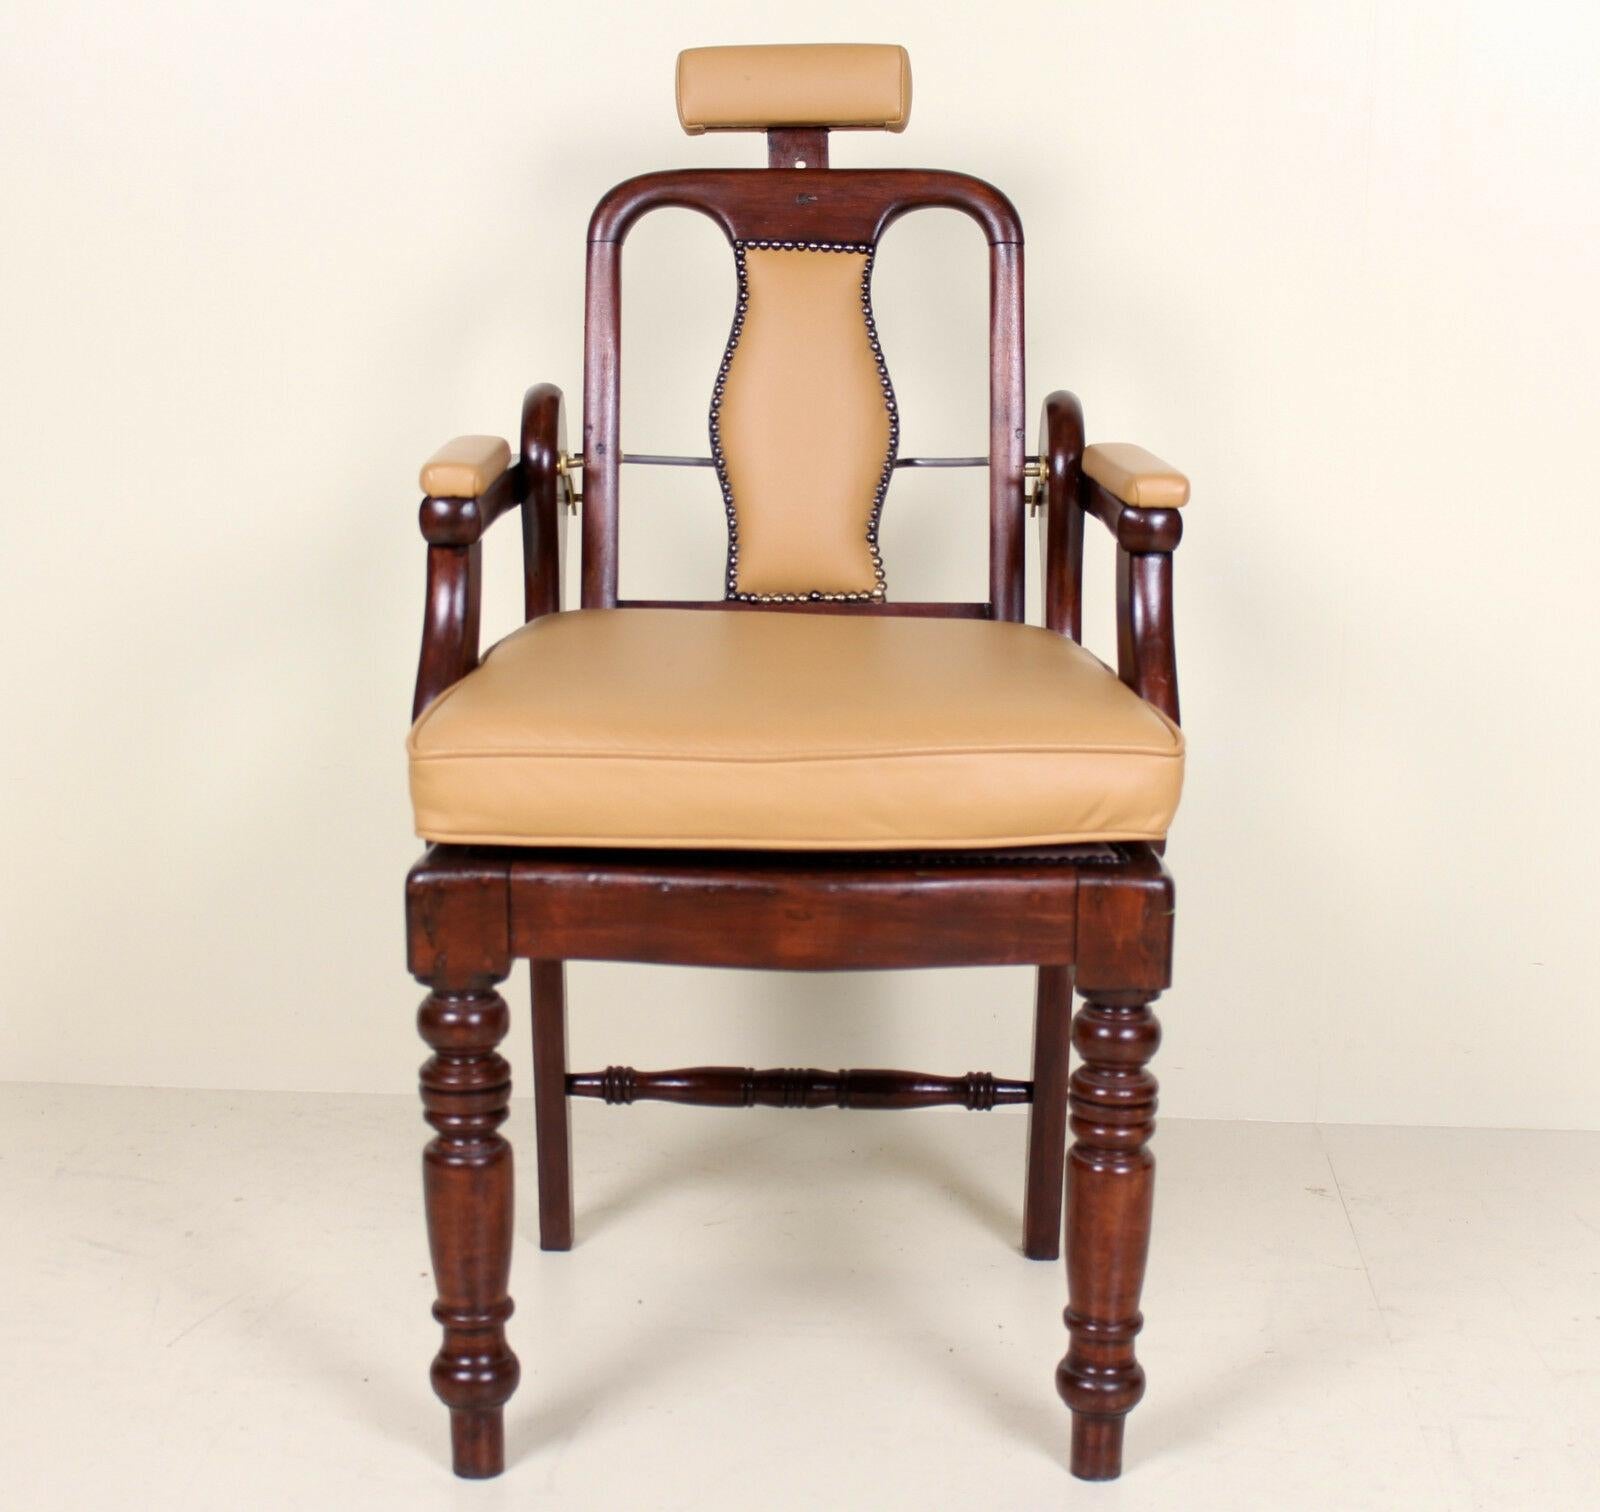 A rare opportunity to acquire an impressive Edwardian period (circa 1905) barbers chair. Framed in carved mahogany, with newly upholstered leather or leather cloth panels with studded brass borders. Raised on carved fluted turned legs.
  